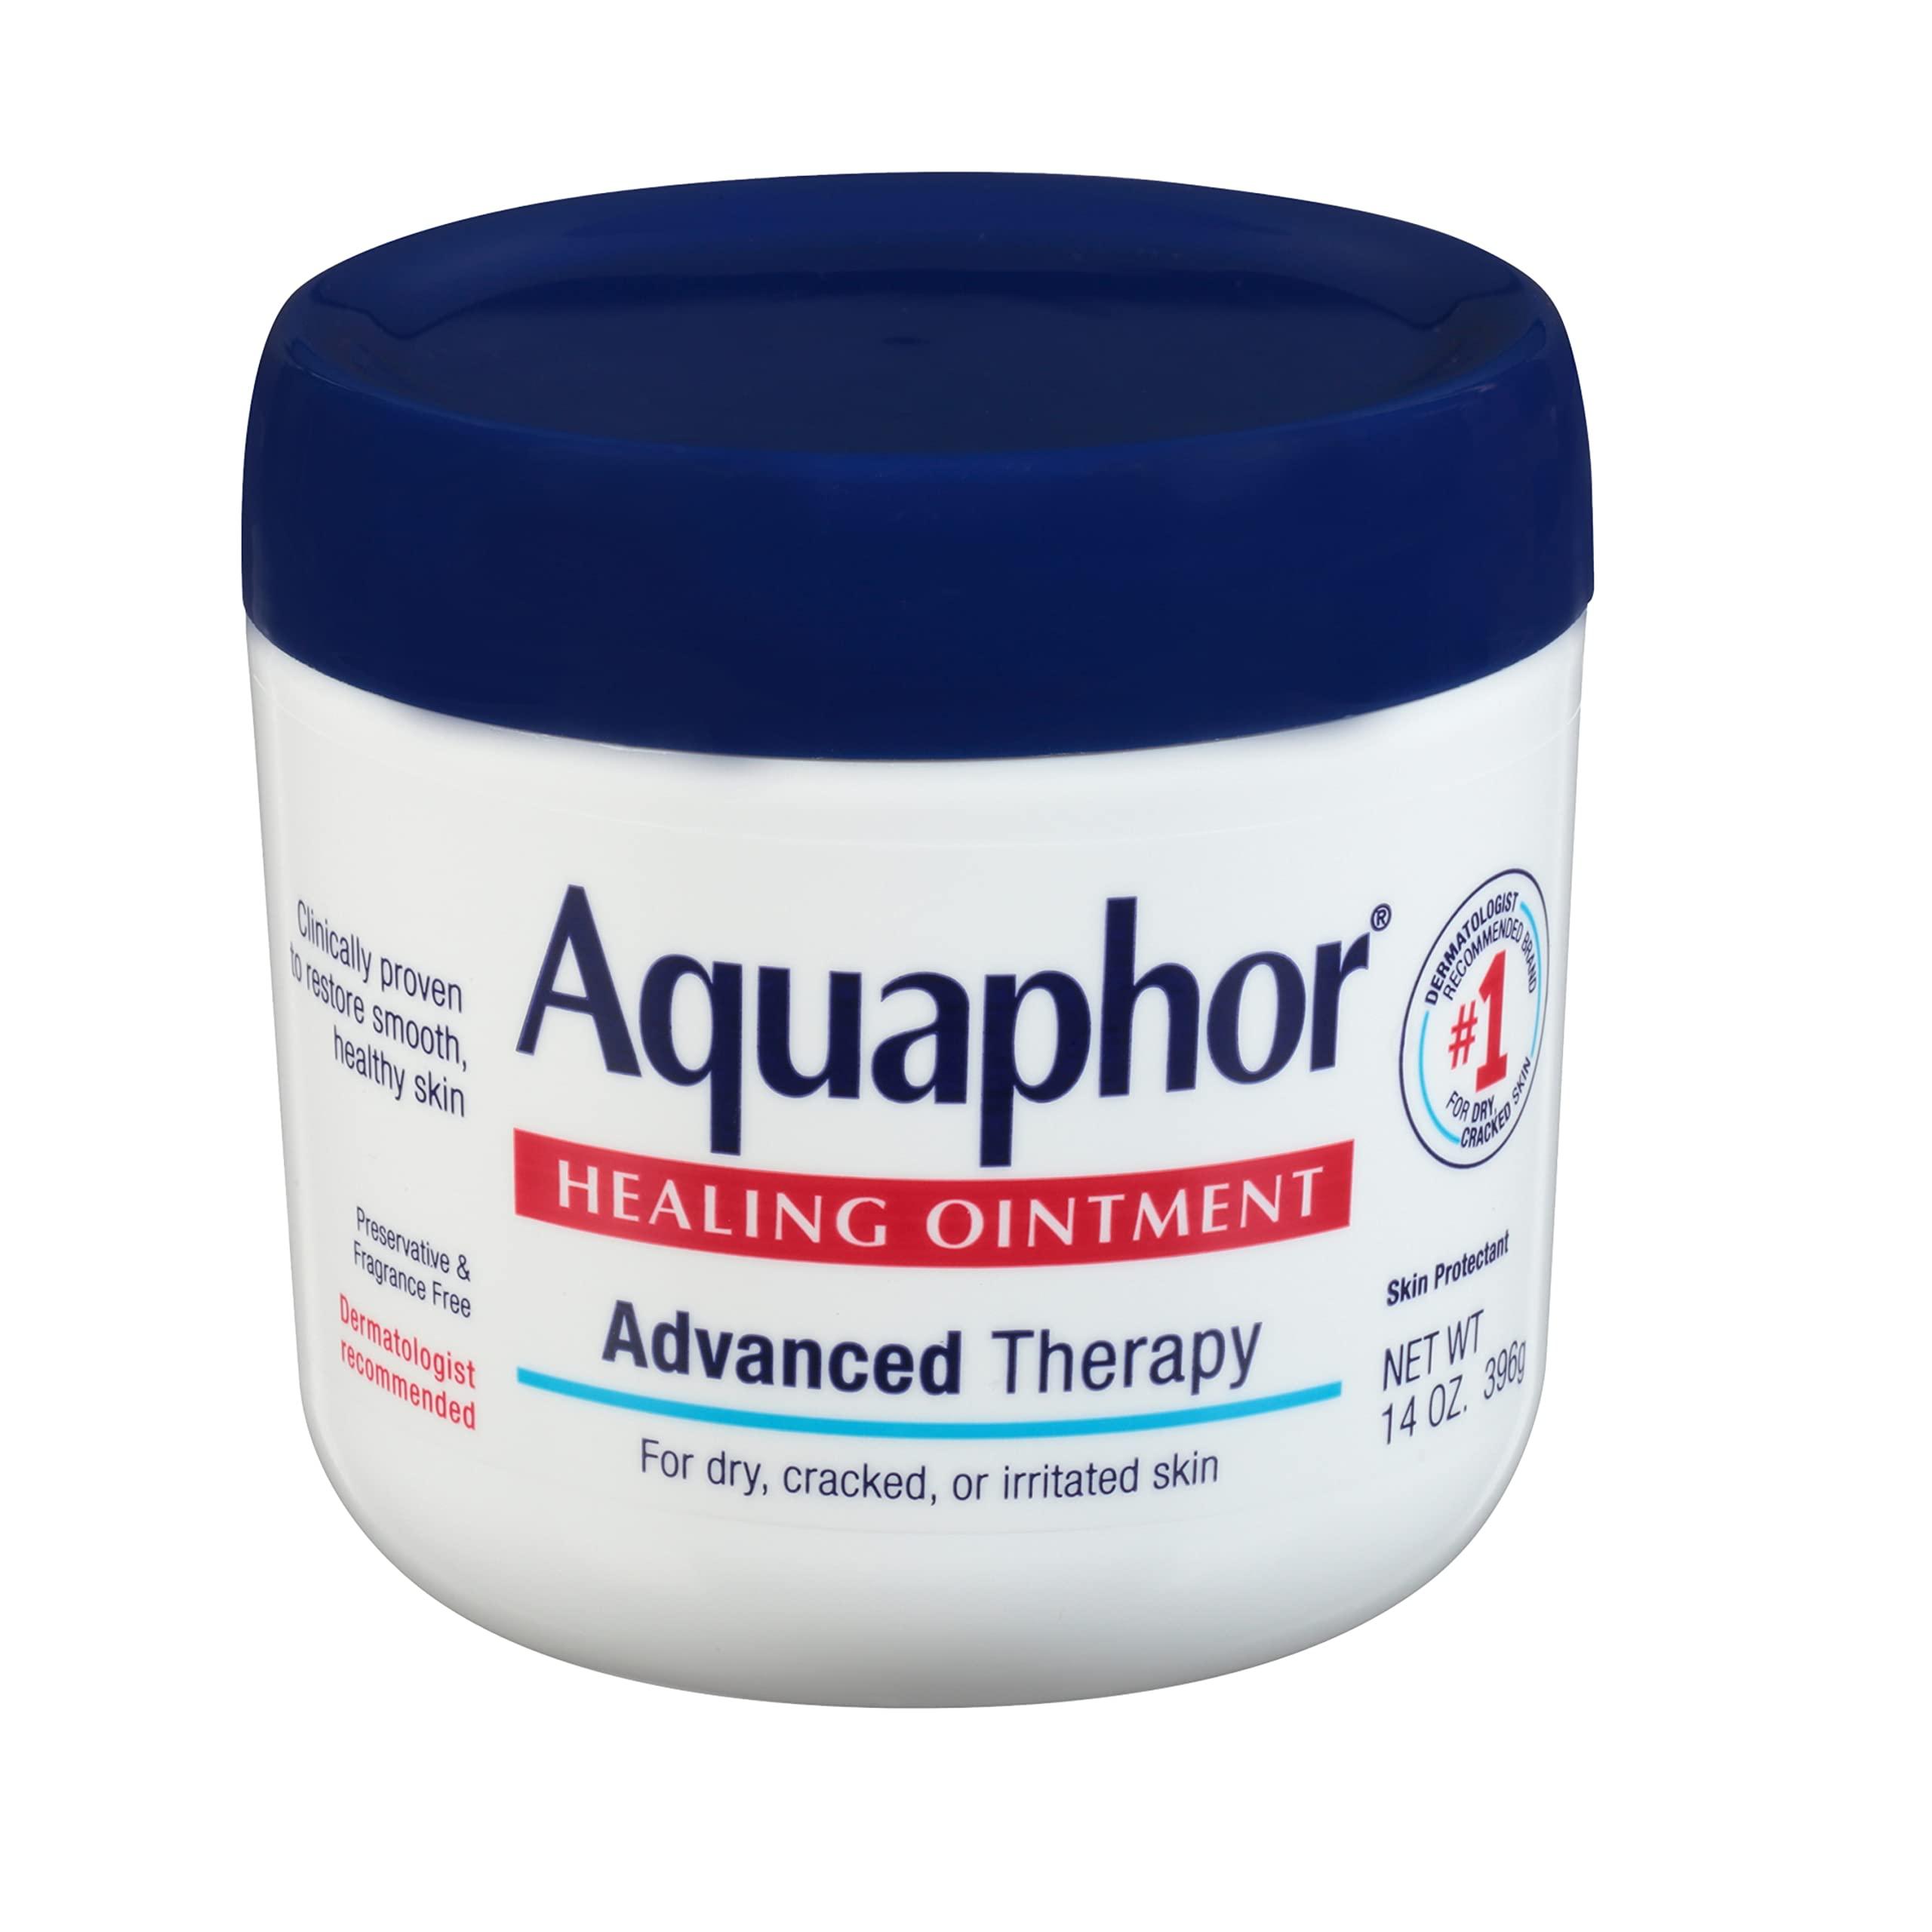 Aquaphor Healing Ointment Advanced Therapy 396g